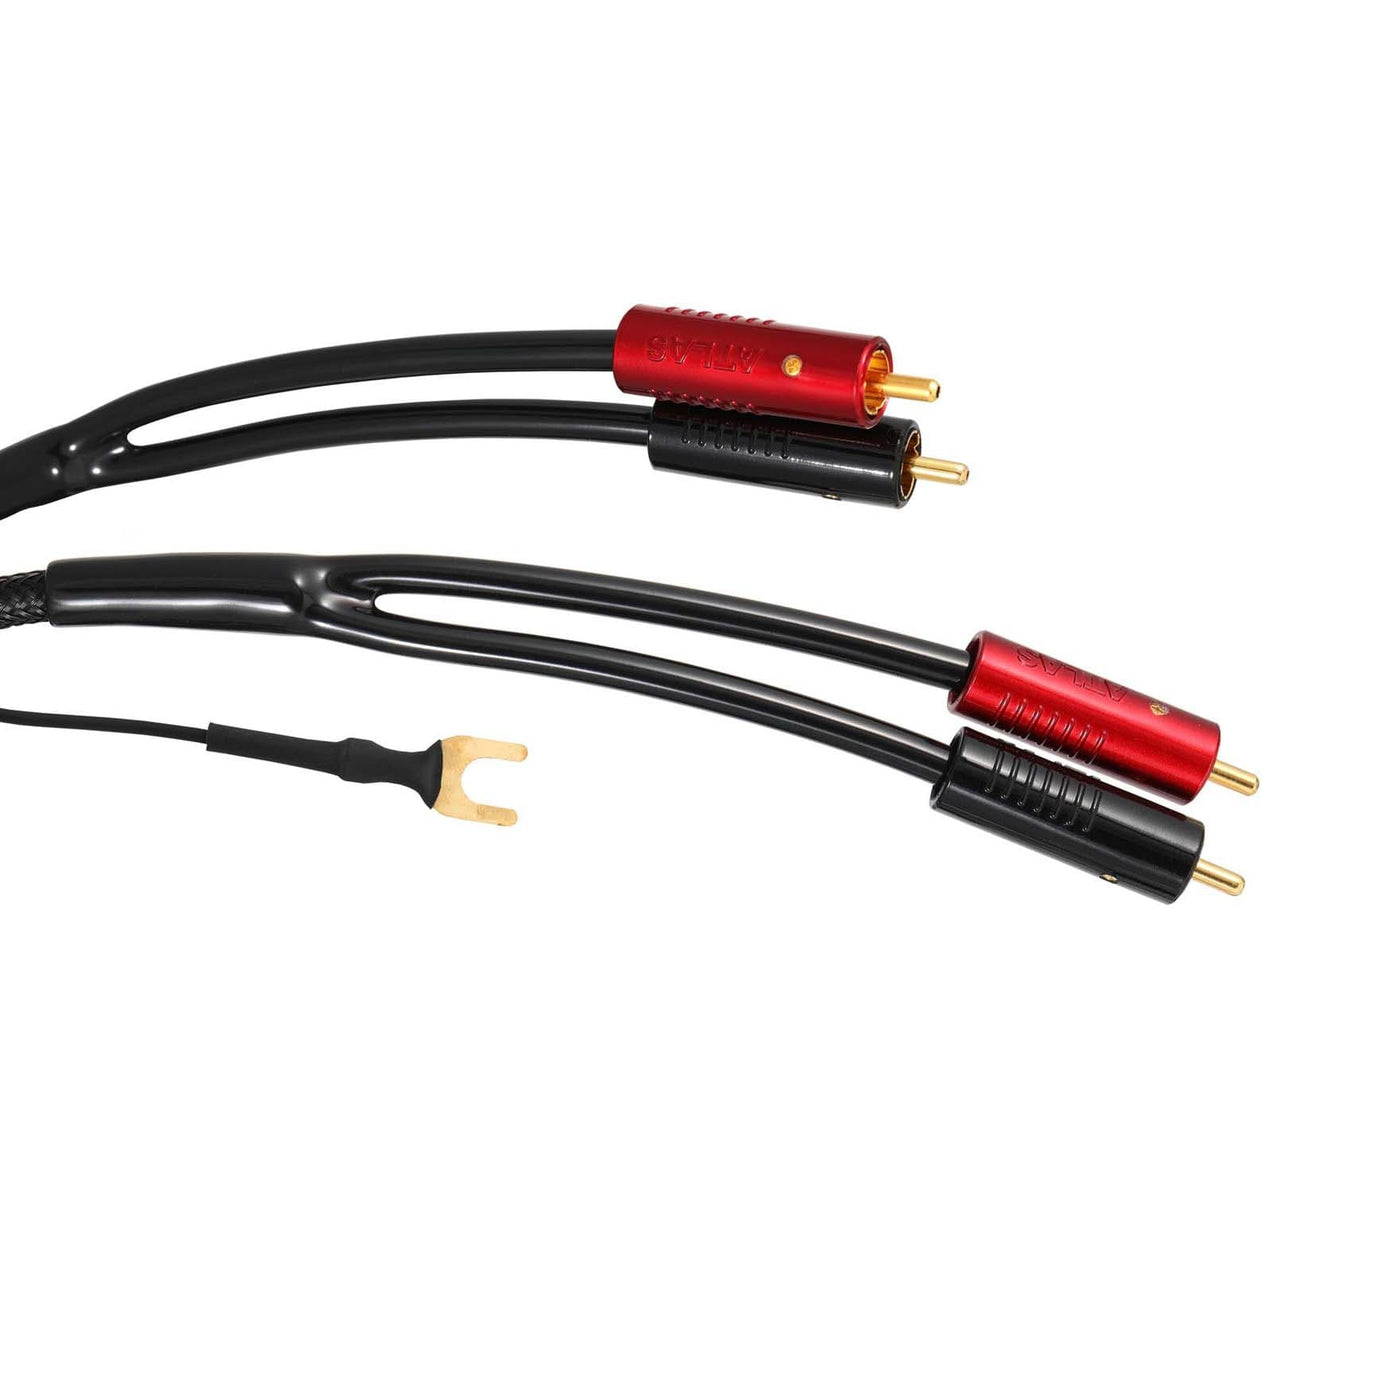 Atlas Hyper Achromatic RCA Turntable Cable at Audio Influence